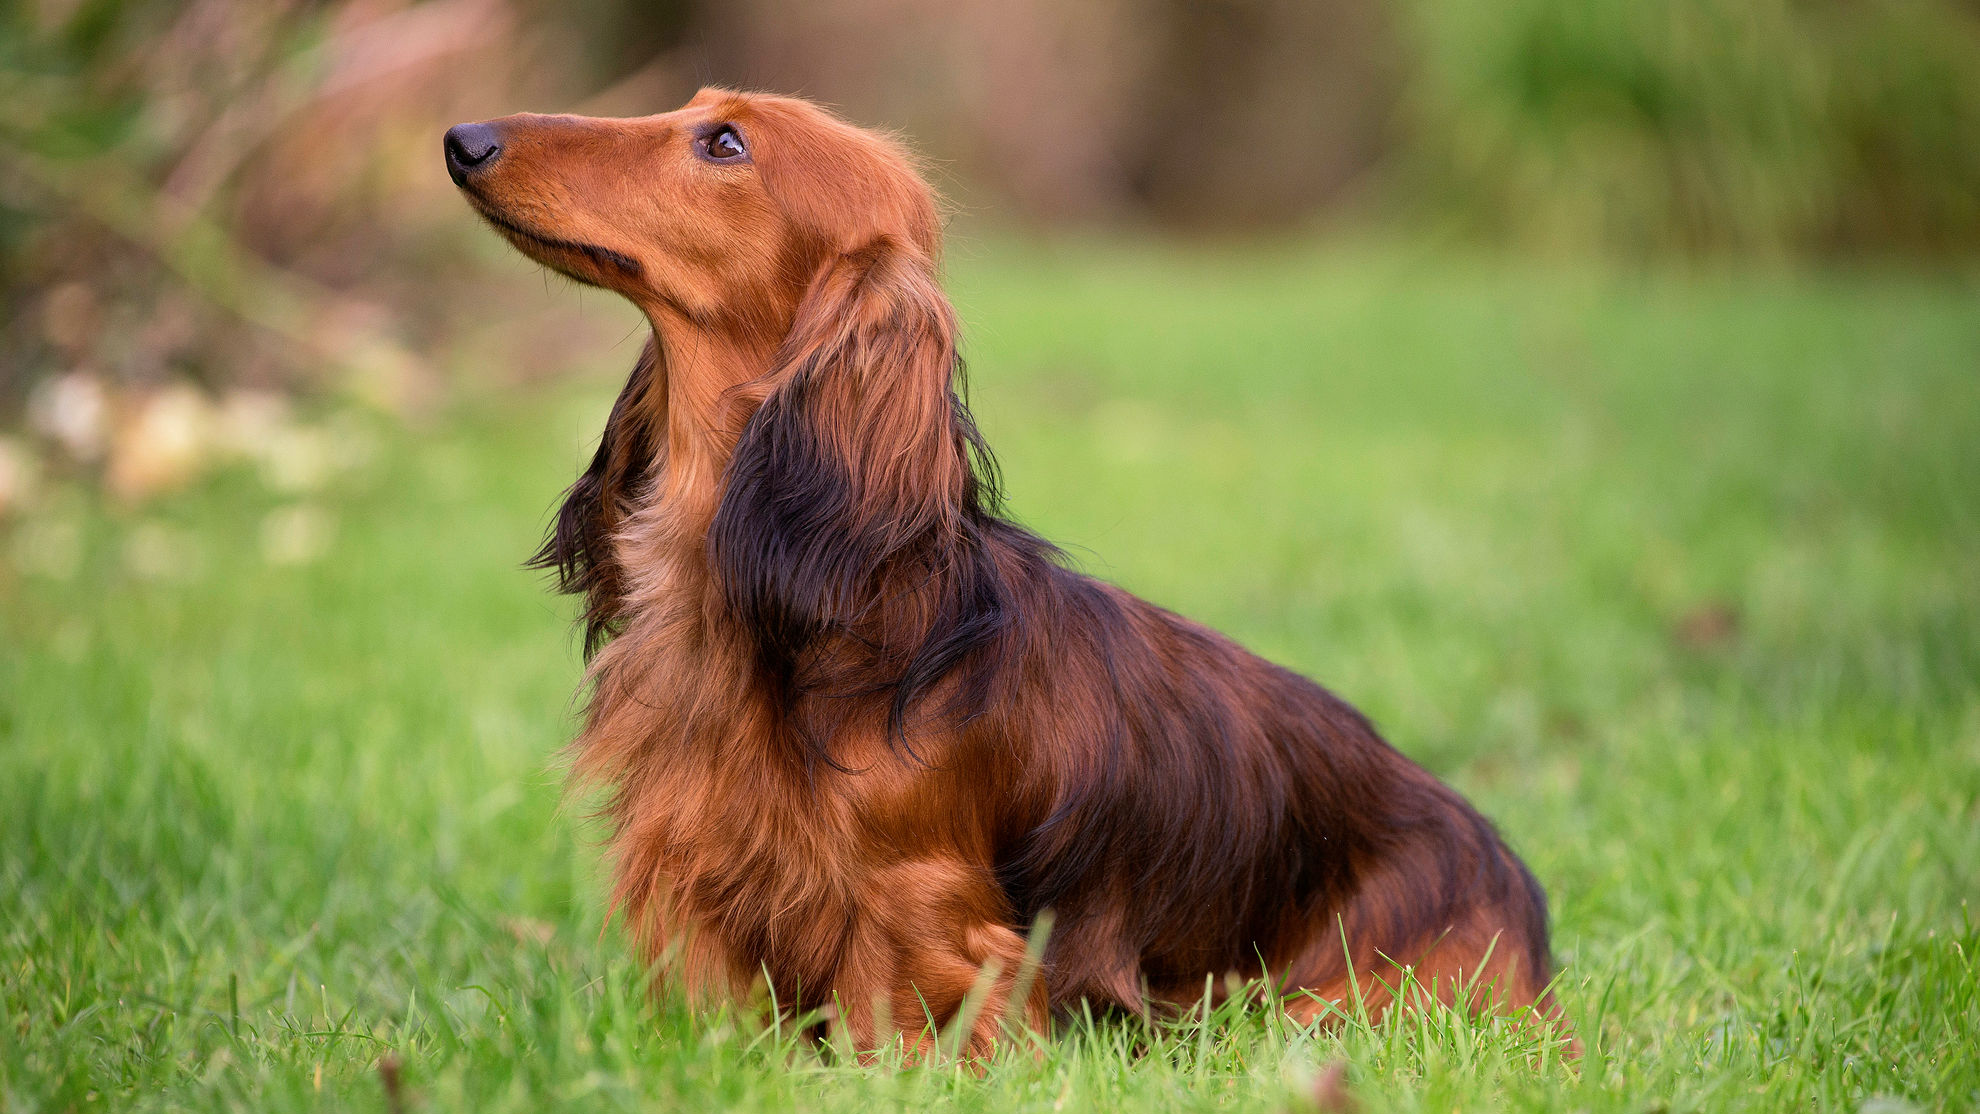 Standard Long-Haired Dachshund sitting in grass